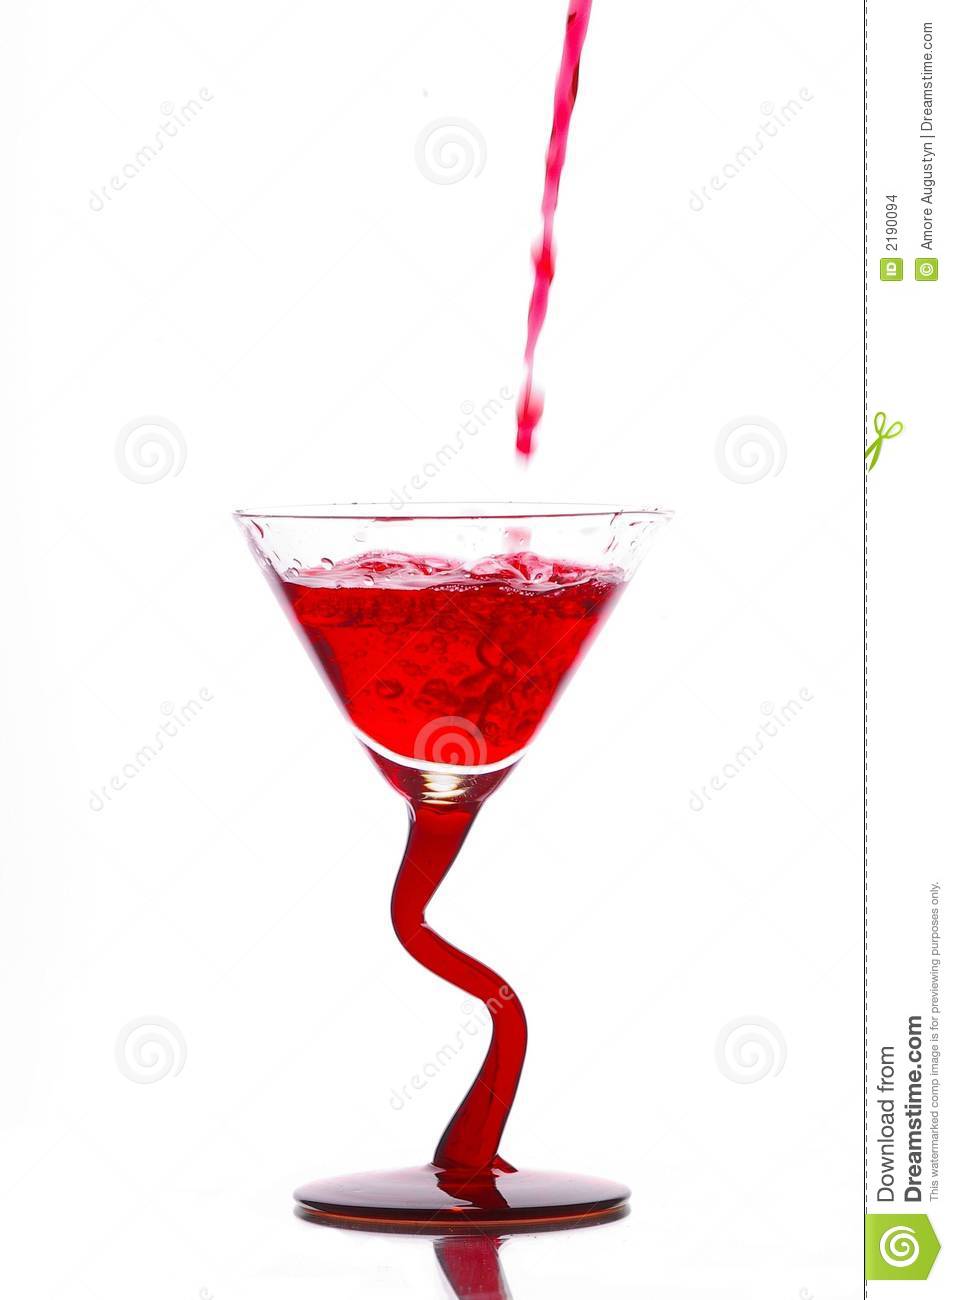 Pouring Liquid Stock Images   Image  2190094